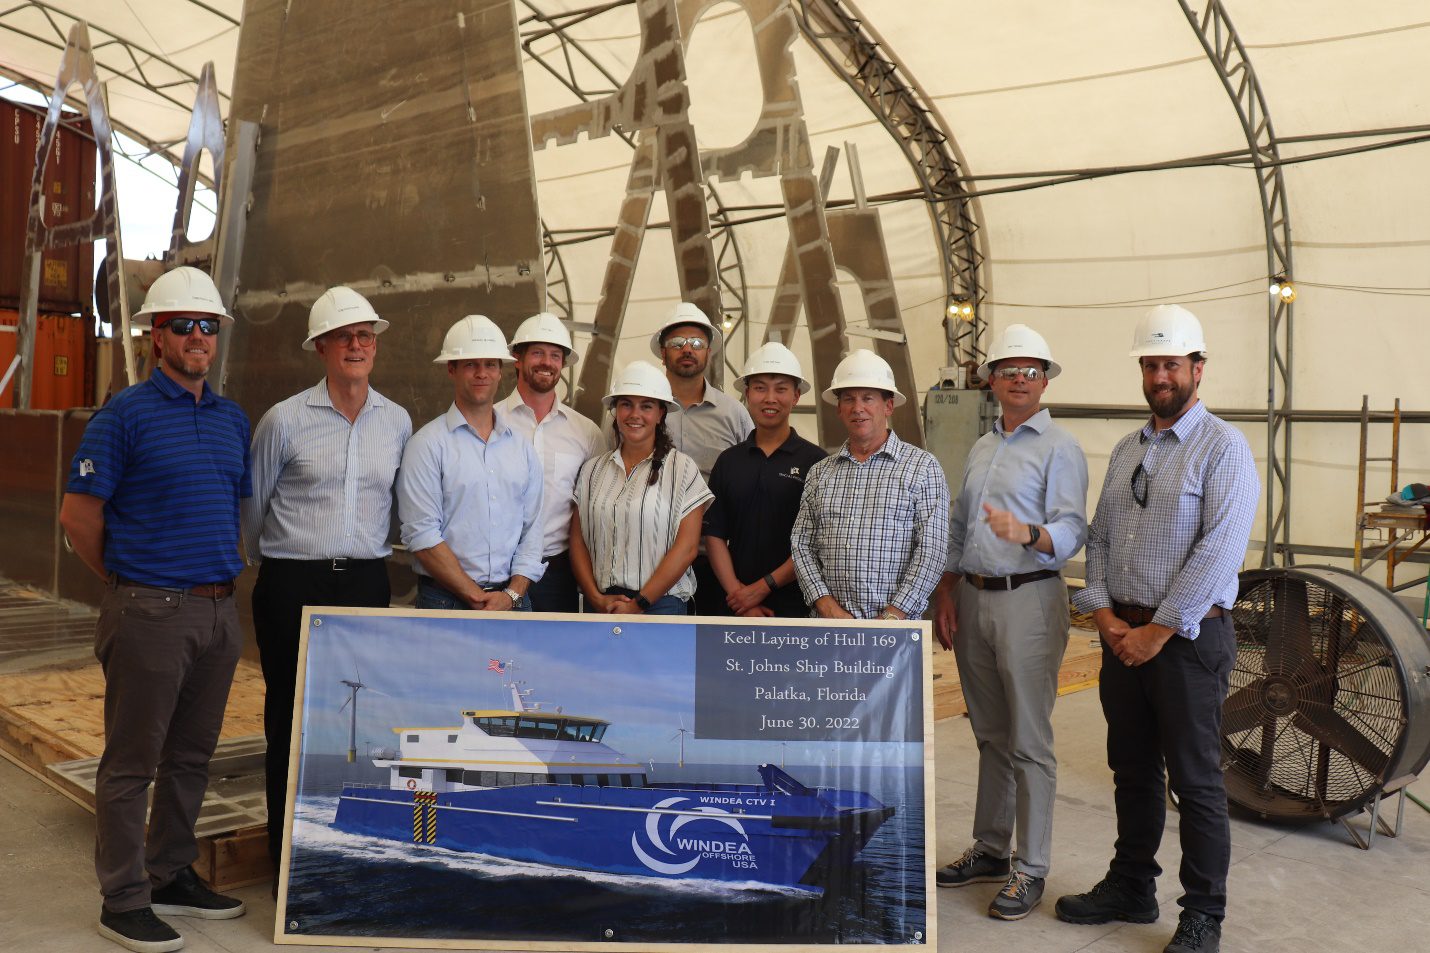 St. Johns Ship Building Lays Keel for First Jones Act Compliant Crew Transfer Vessel Under New Ownership